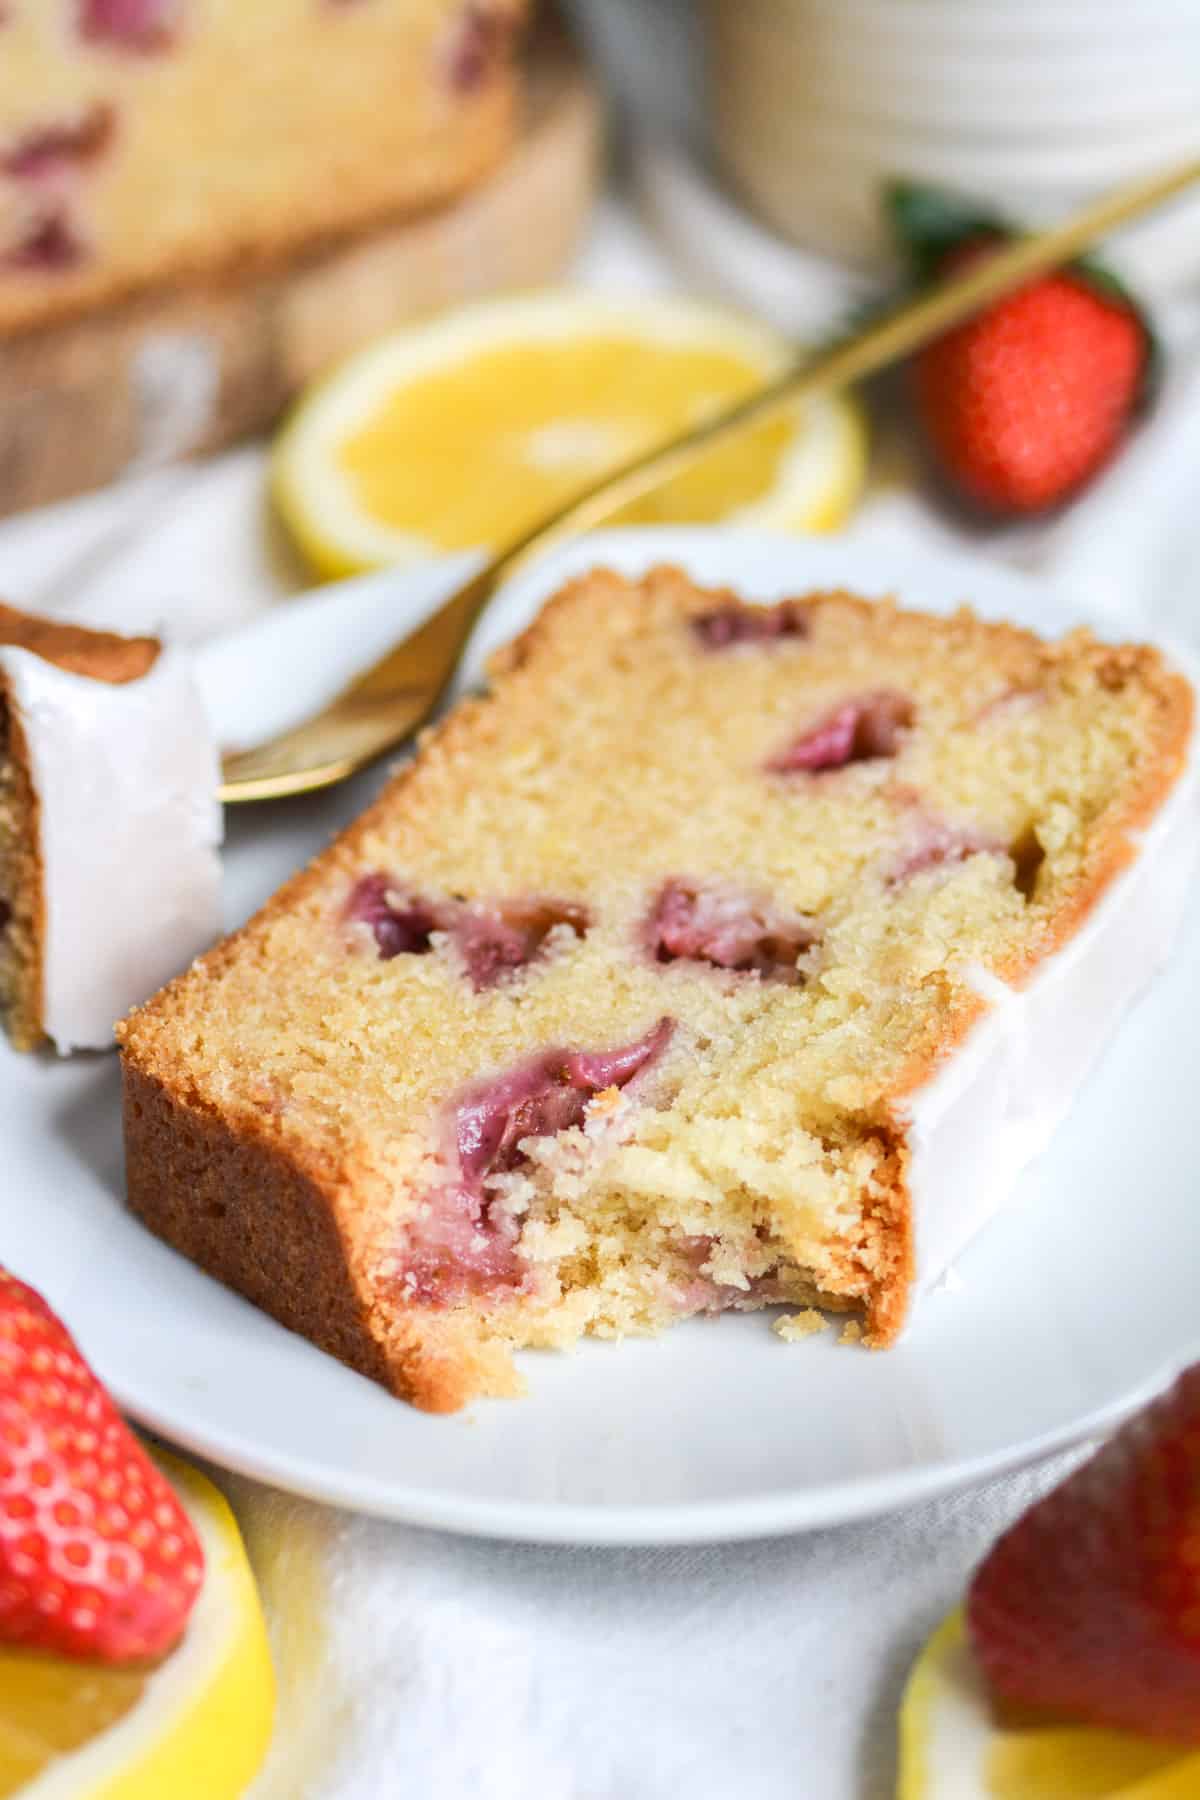 A bite taken out of a slice of vegan strawberry pound cake on a white plate with lemon slices and strawberries in the foreground.